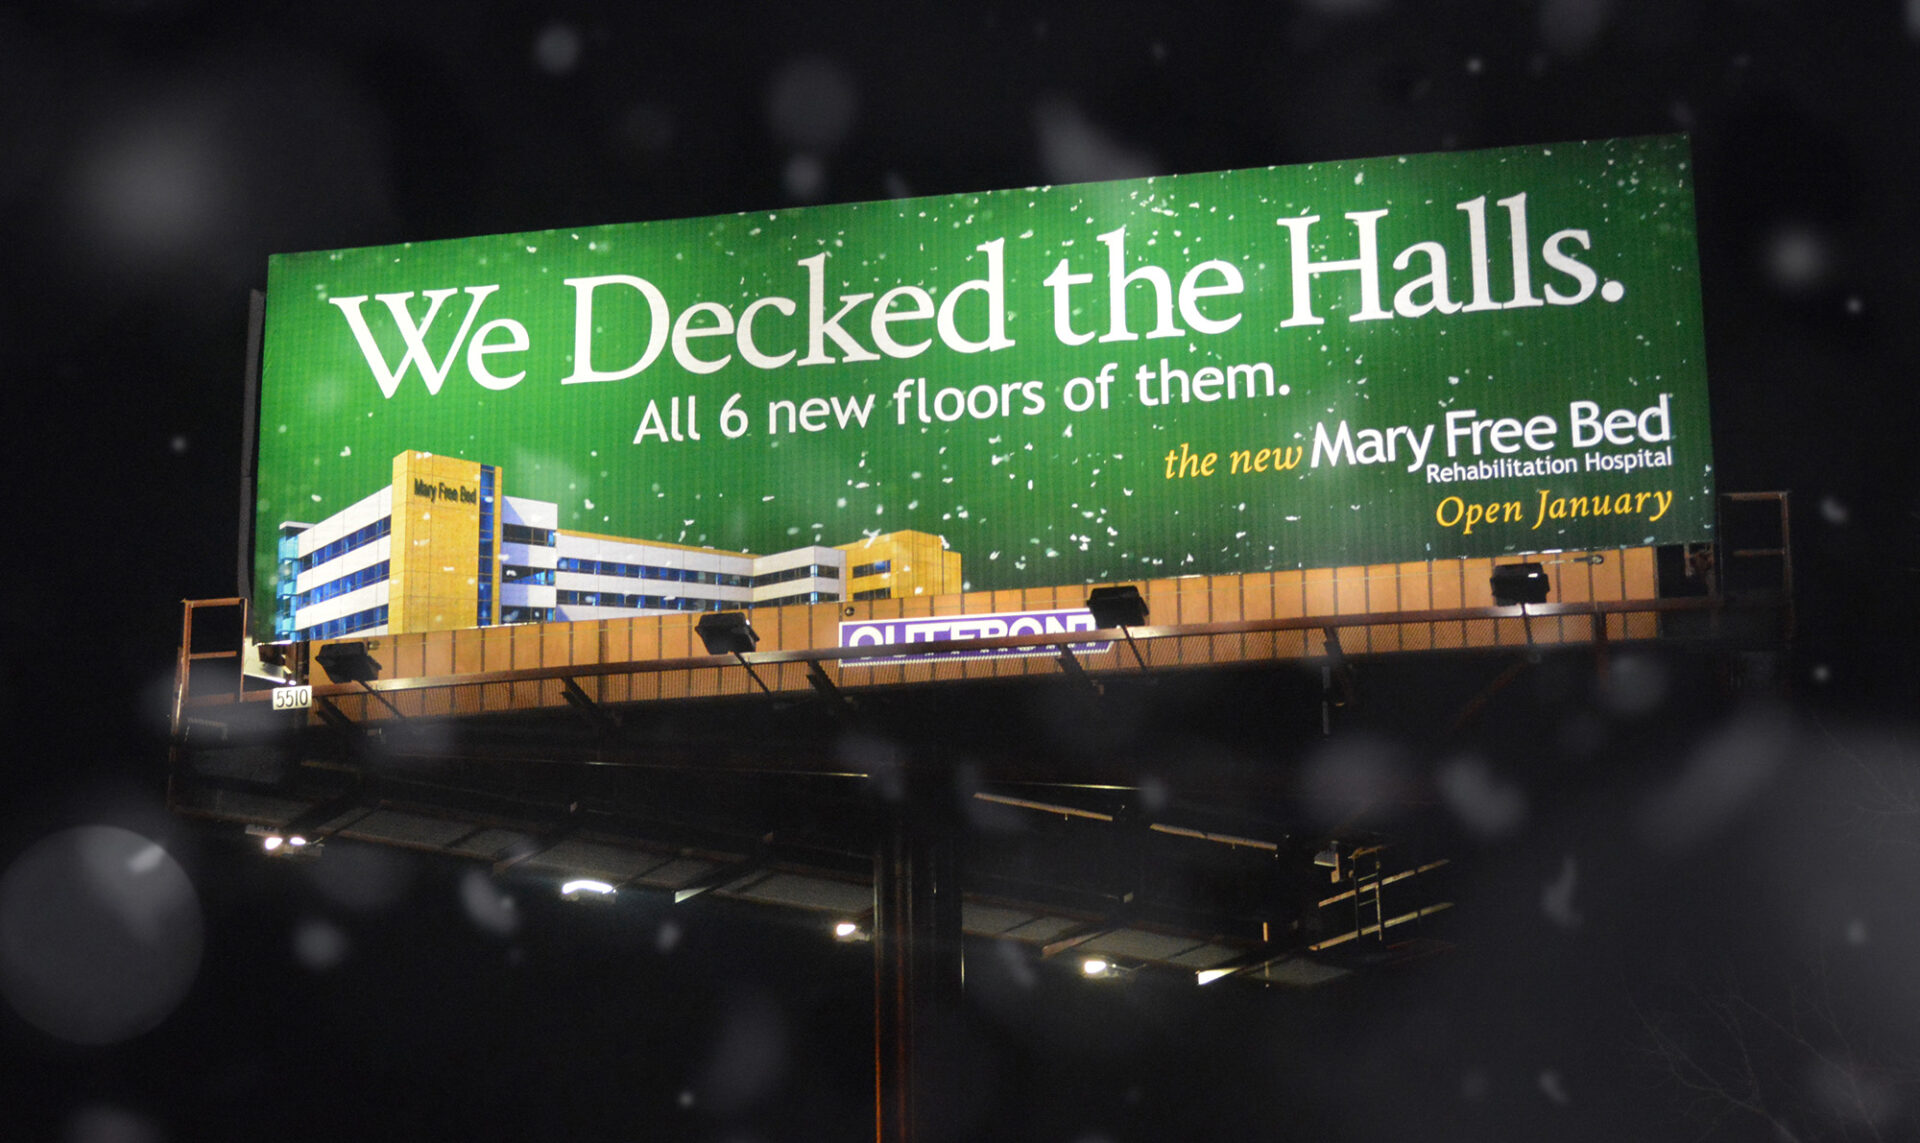 Out of home bulletin for Mary Free Bed. We decked the halls. All 6 new floors of them.